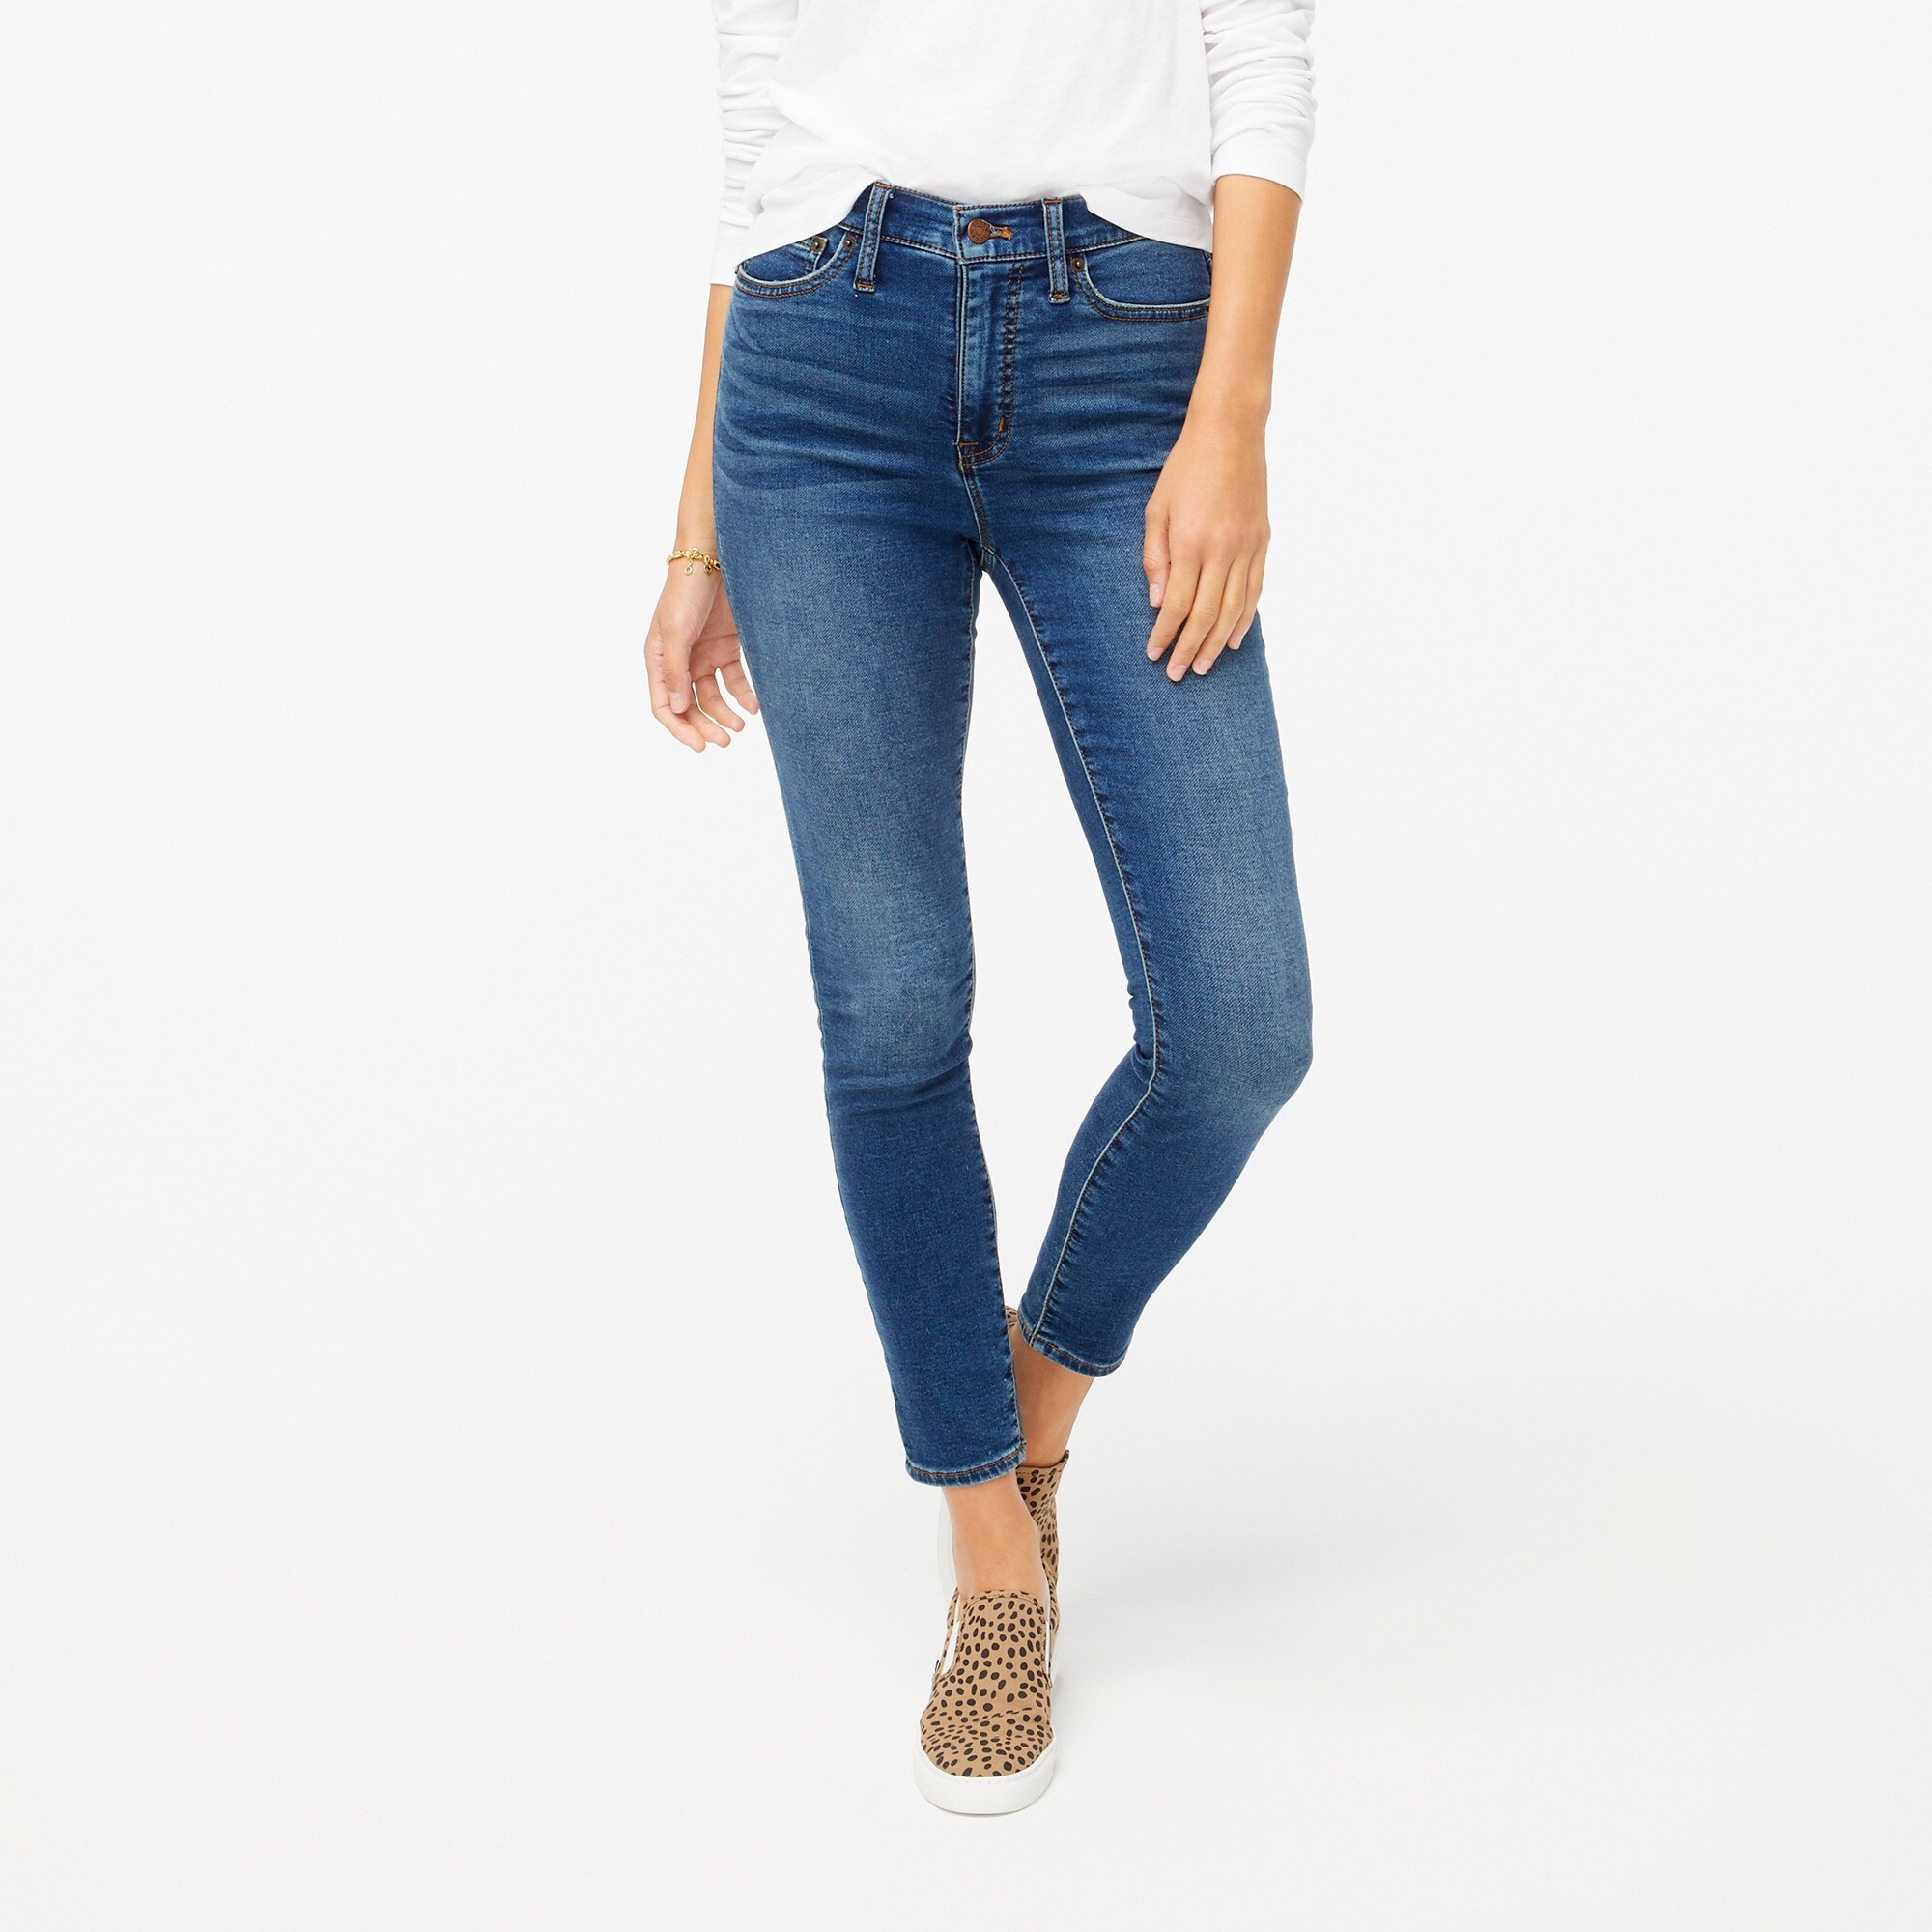 relaxed fit jean